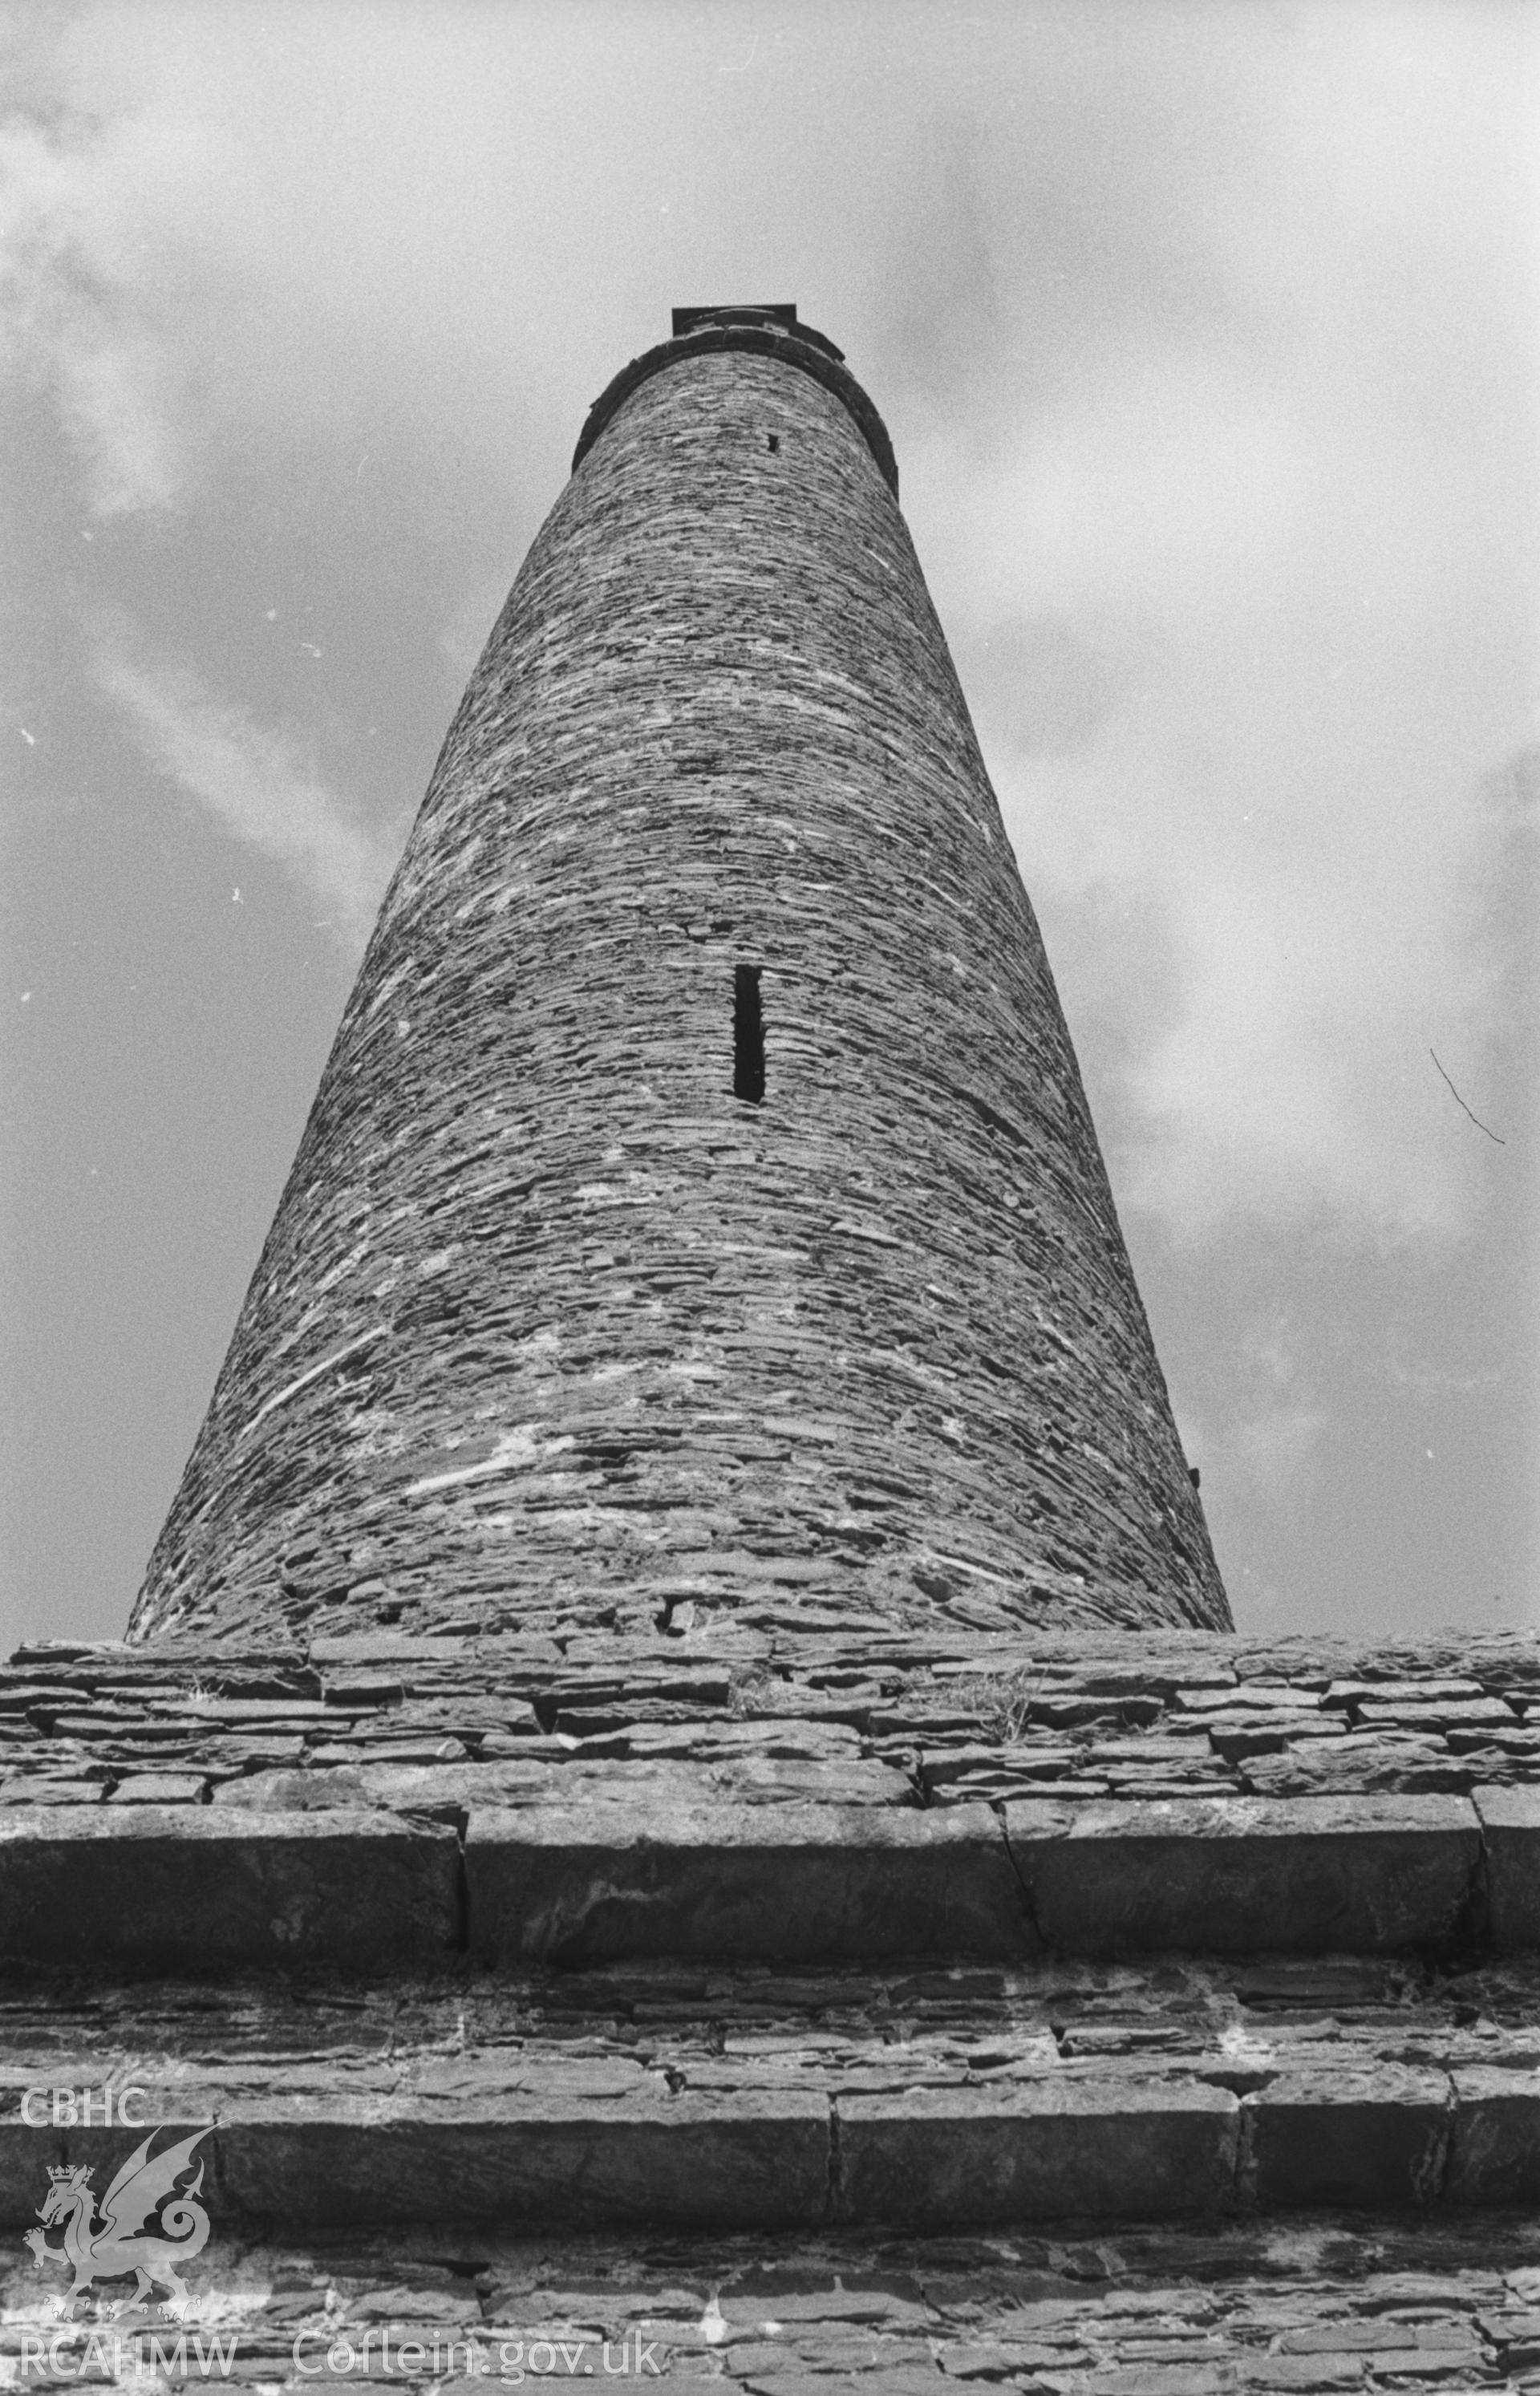 Digital copy of a black and white negative showing view looking up at the south west side of the Derry Ormond tower. Photographed by Arthur O. Chater in April 1966 from Grid Reference SN 590 517, looking north east.